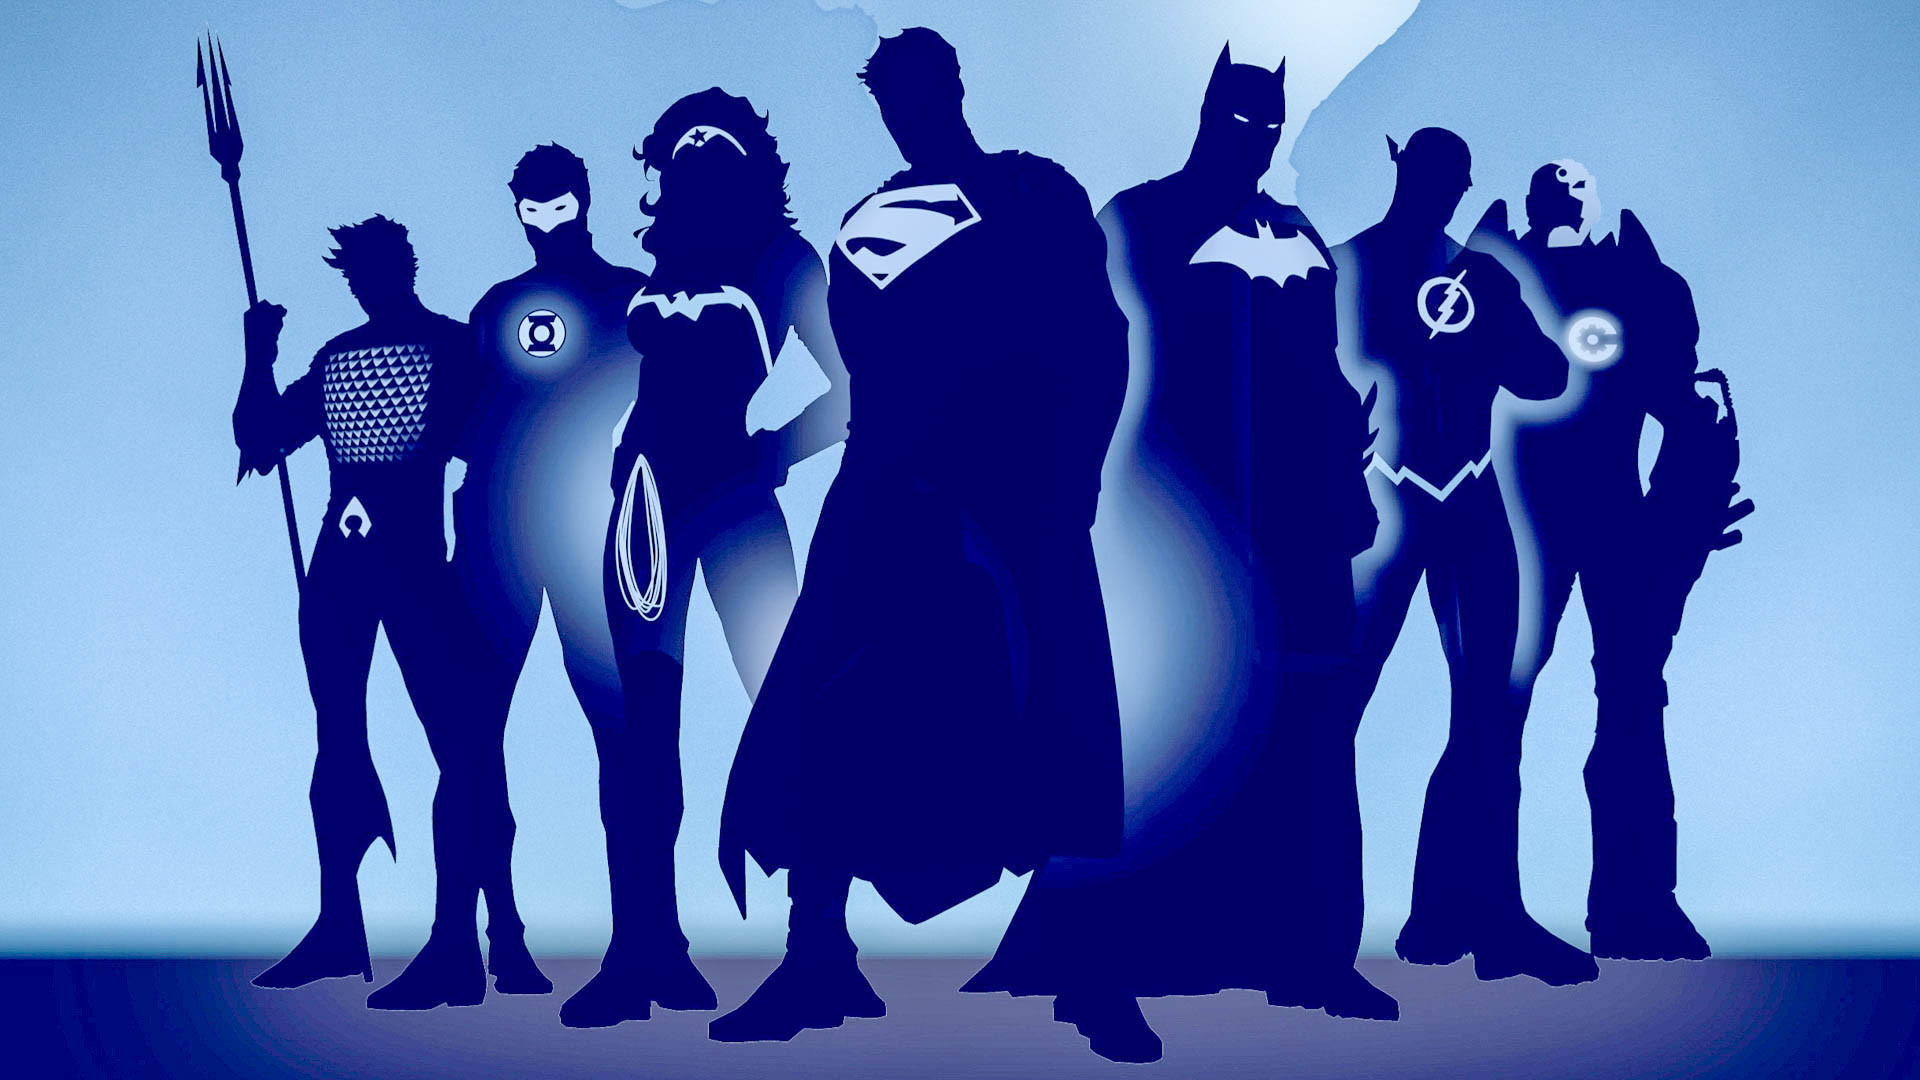 New Justice League Team Wallpapers